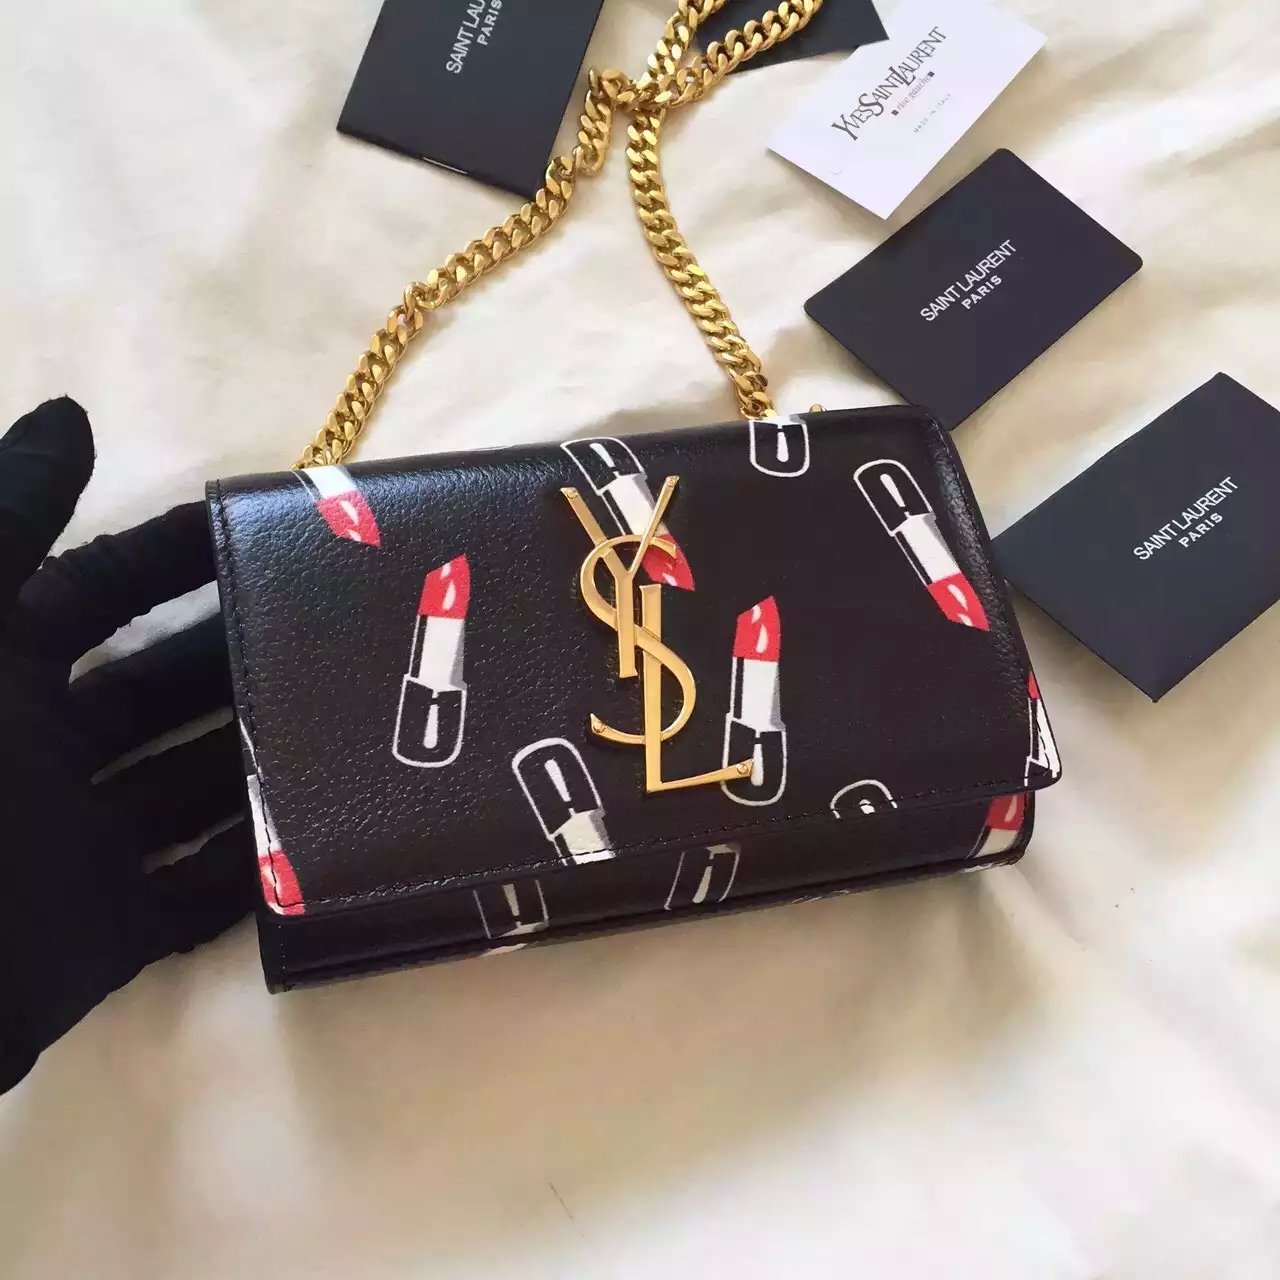 2015 New Saint Laurent Bag Cheap Sale-Saint Laurent Classic Monogram Satchel in Black,Red and White Lipstick Printed Leather - Click Image to Close